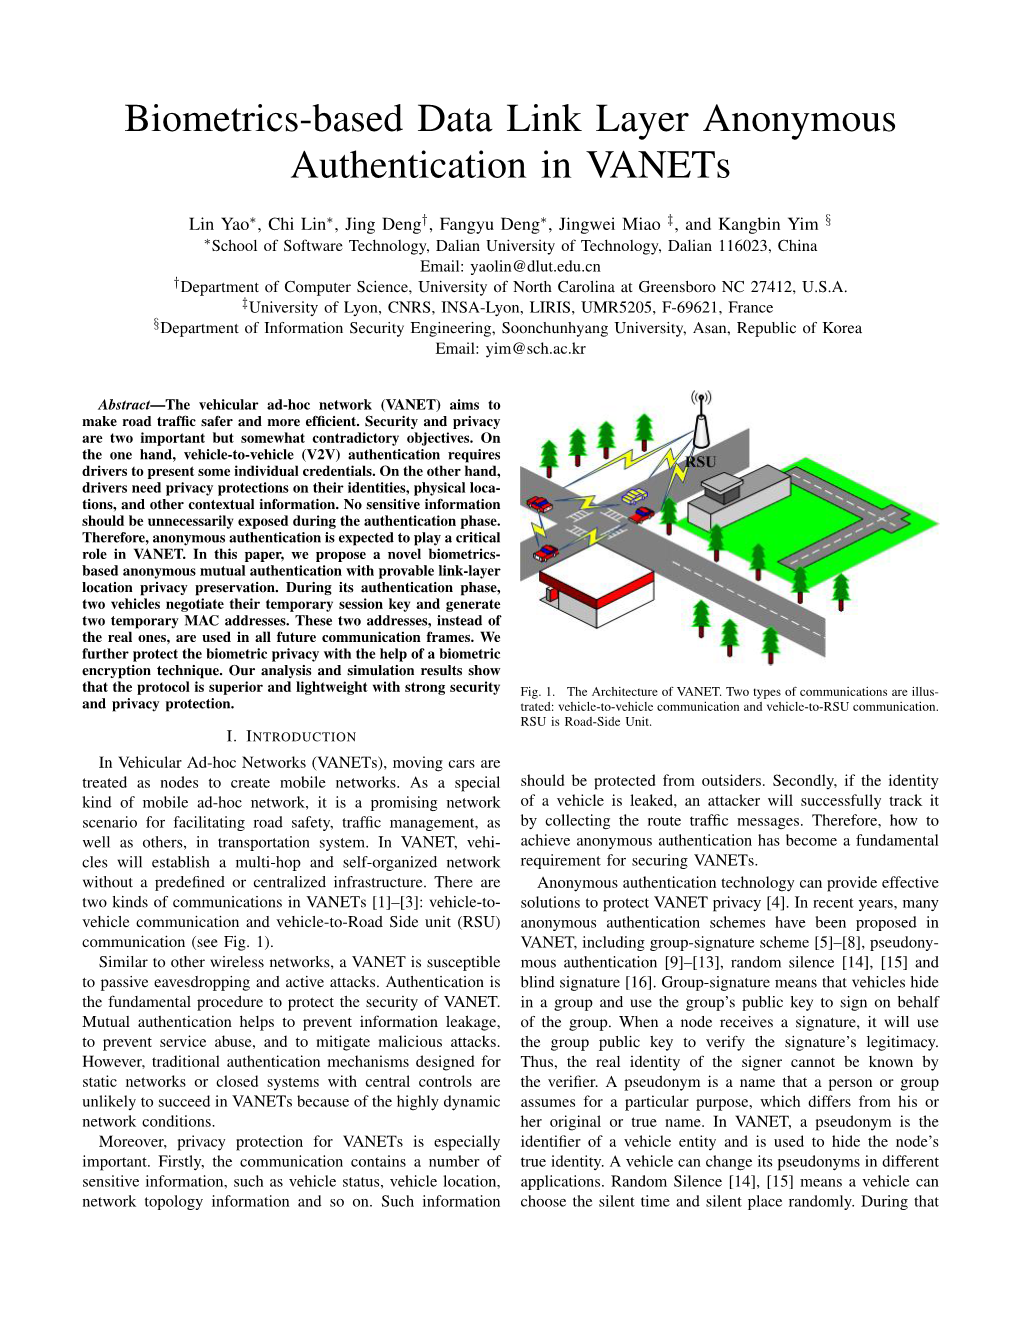 Biometrics-Based Data Link Layer Anonymous Authentication in Vanets